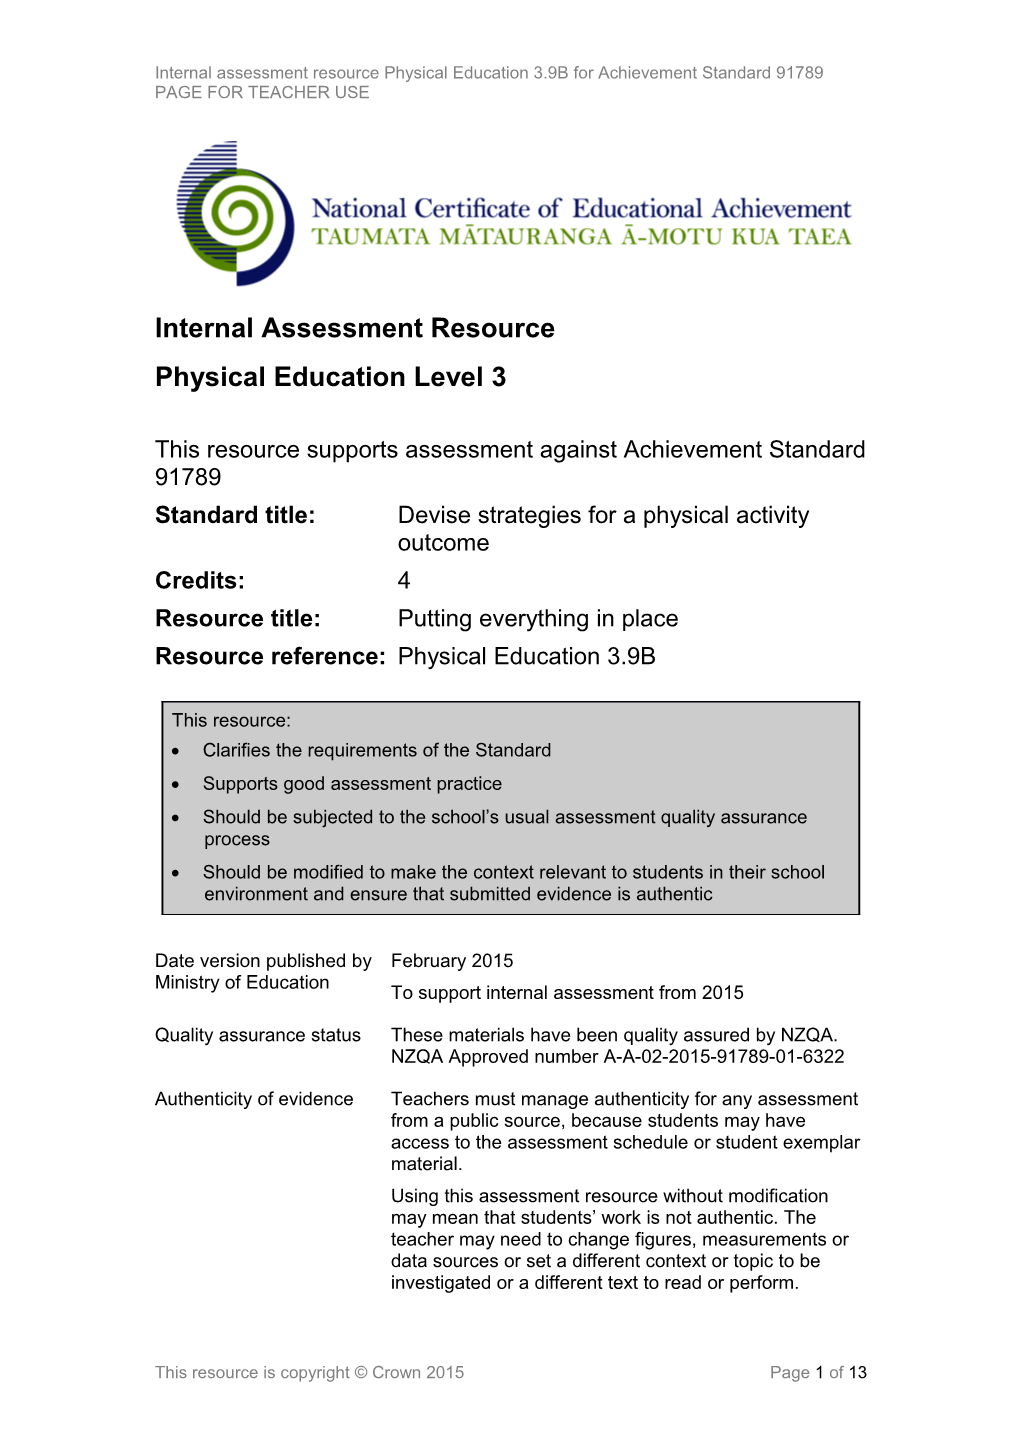 Internal Assessment Resource Physical Eduction L3